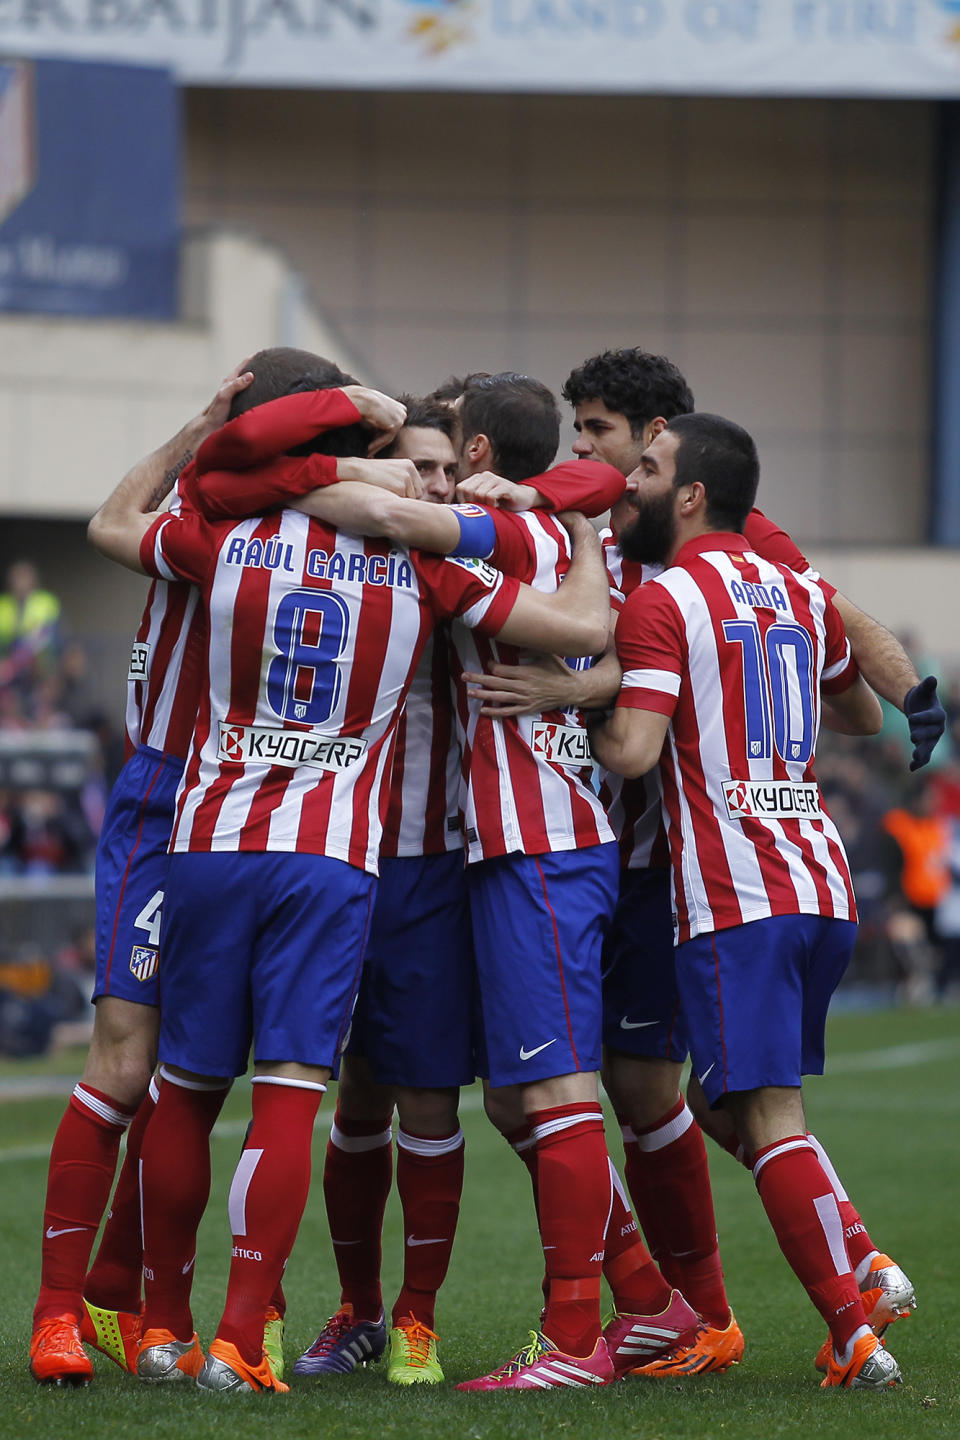 Atletico's Raul García, left, celebrates his goal with teammates during a Spanish La Liga soccer match between Atletico Madrid and Valladolid at the Vicente Calderon stadium in Madrid, Spain, Saturday, Feb. 15, 2014. (AP Photo/Gabriel Pecot)